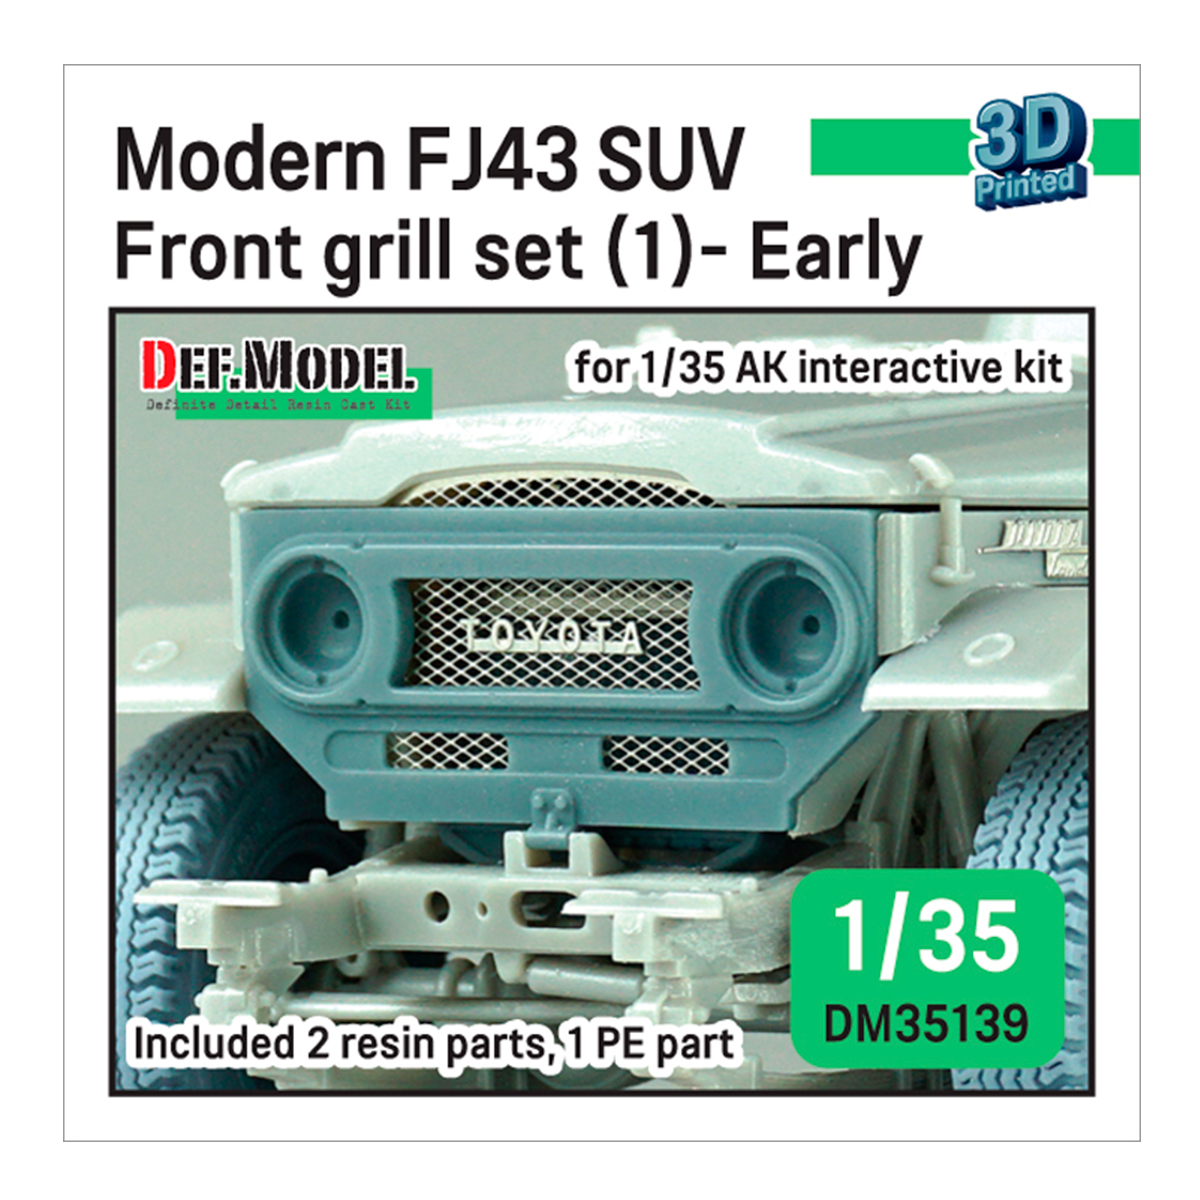 FJ43 front grill set (1) Early (for 1/35 AK Interactive kit)